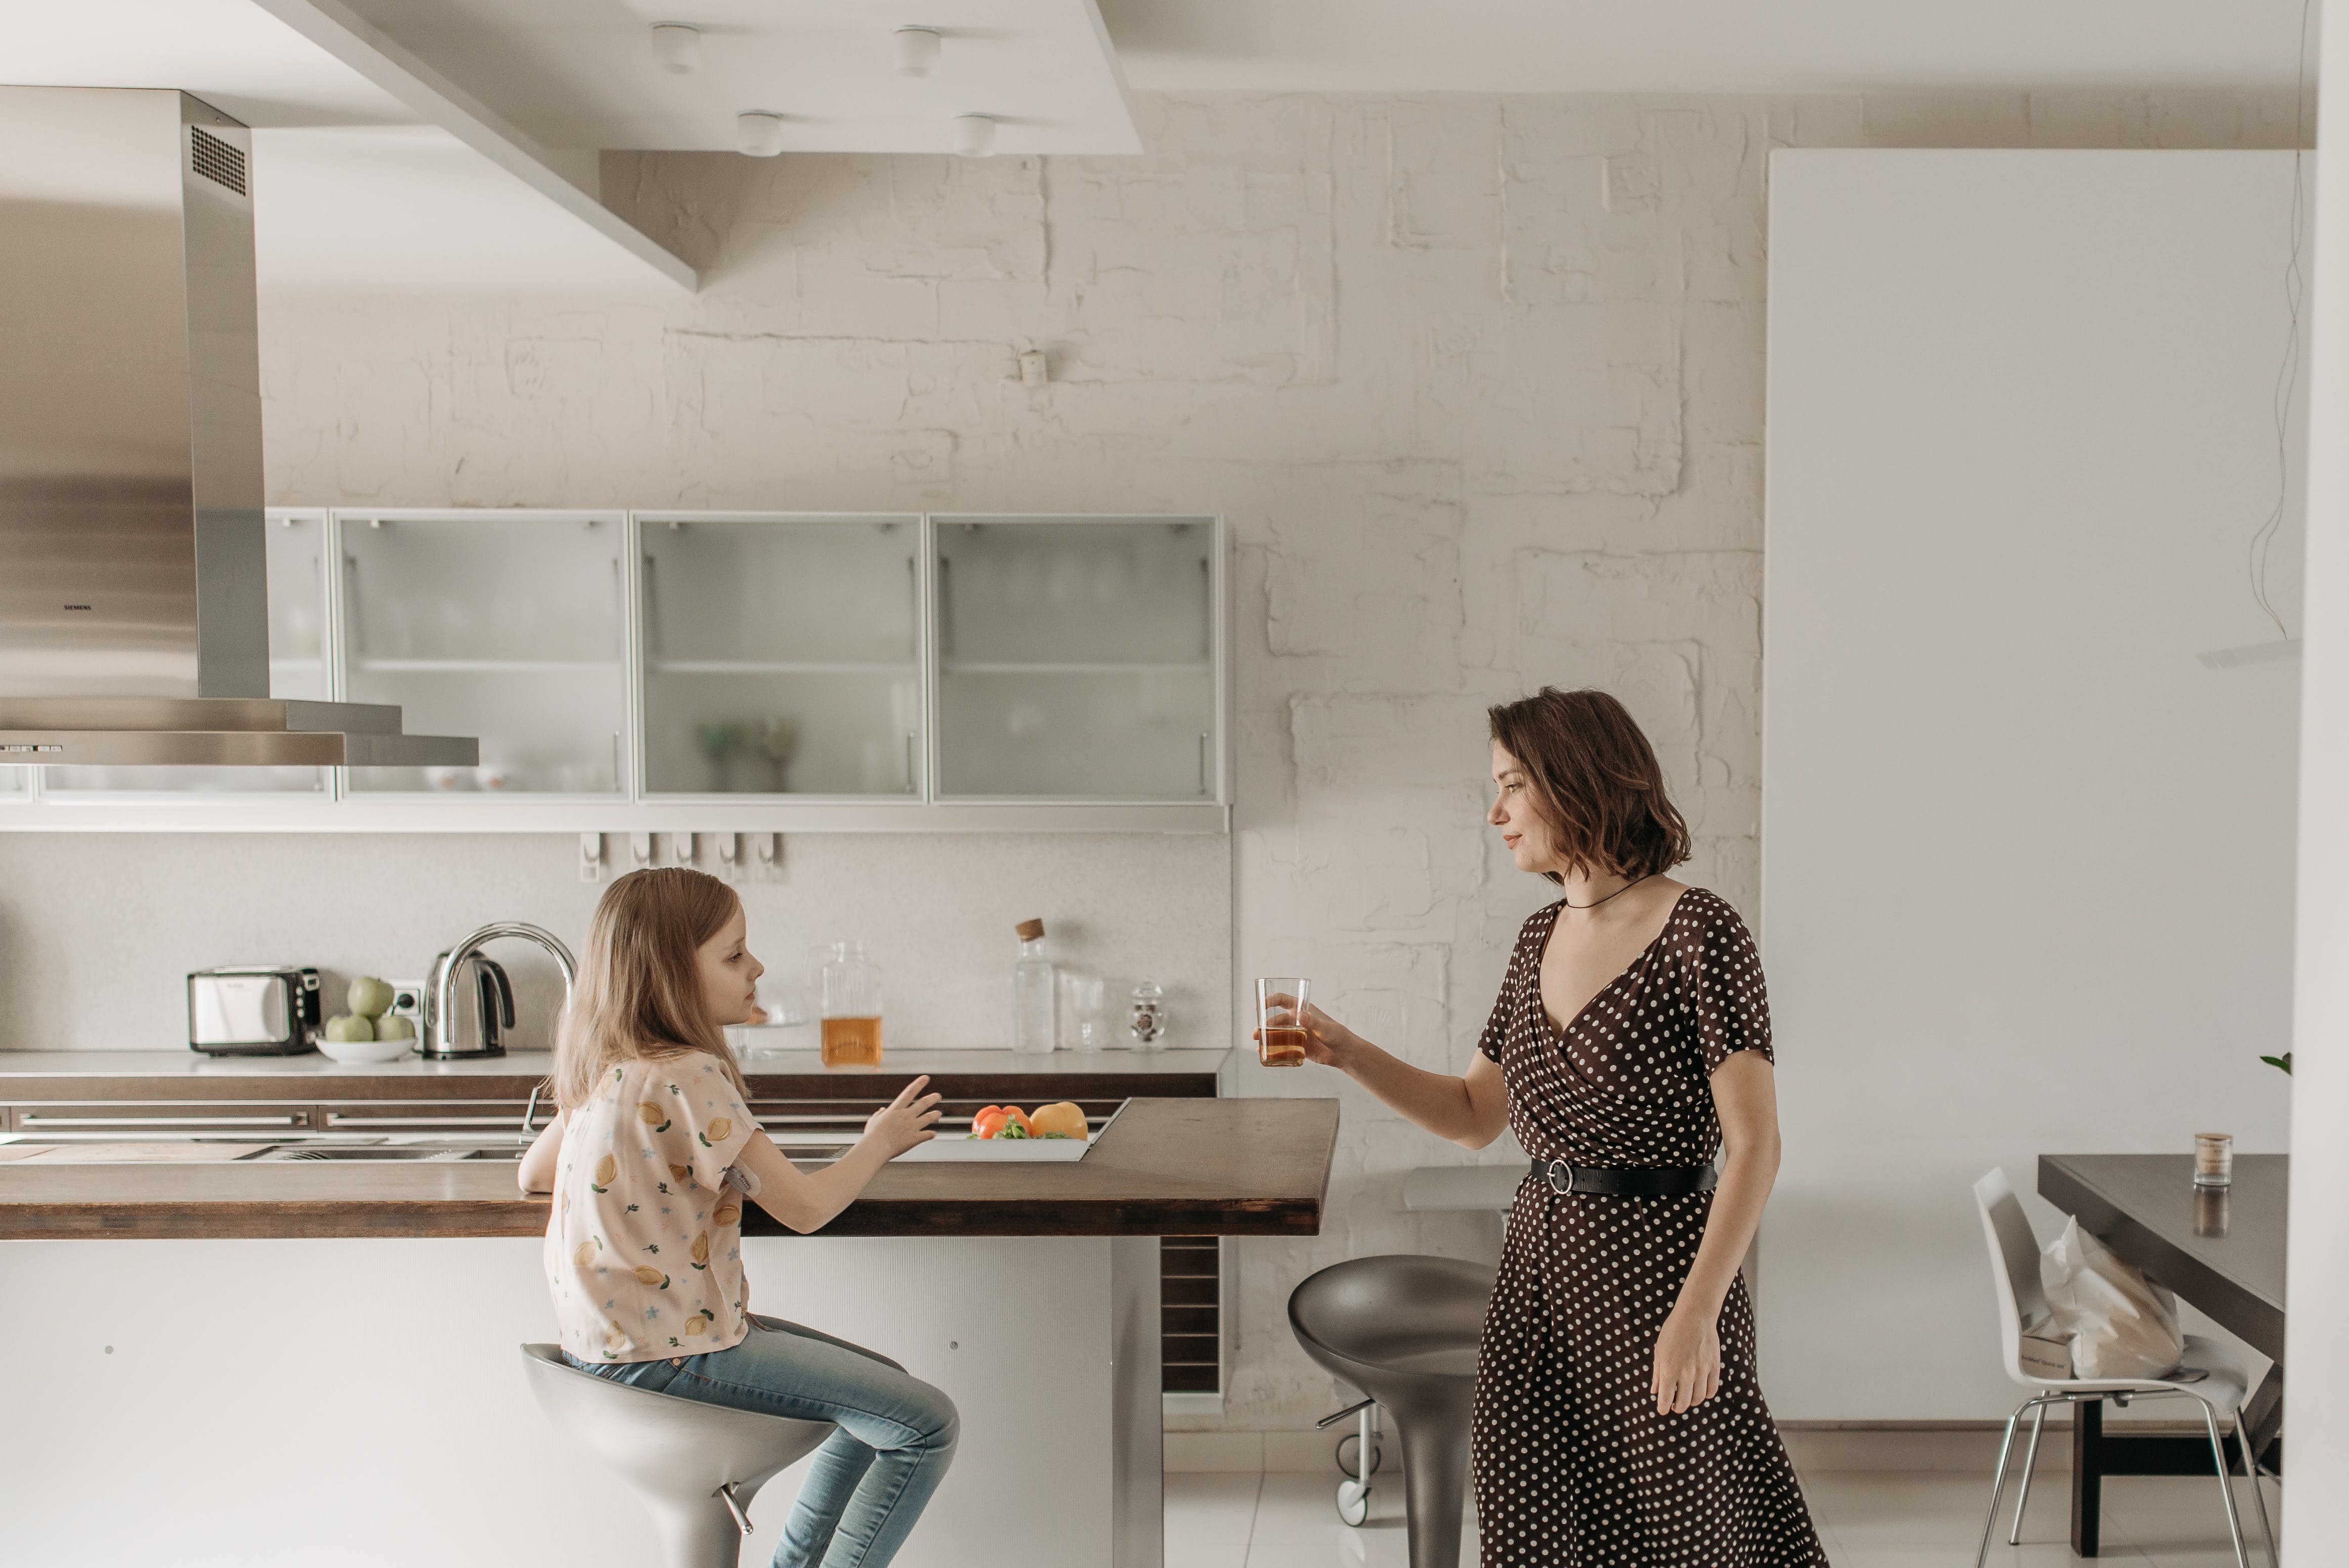 Mother and daughter in a modern kitchen | Source: Pexels